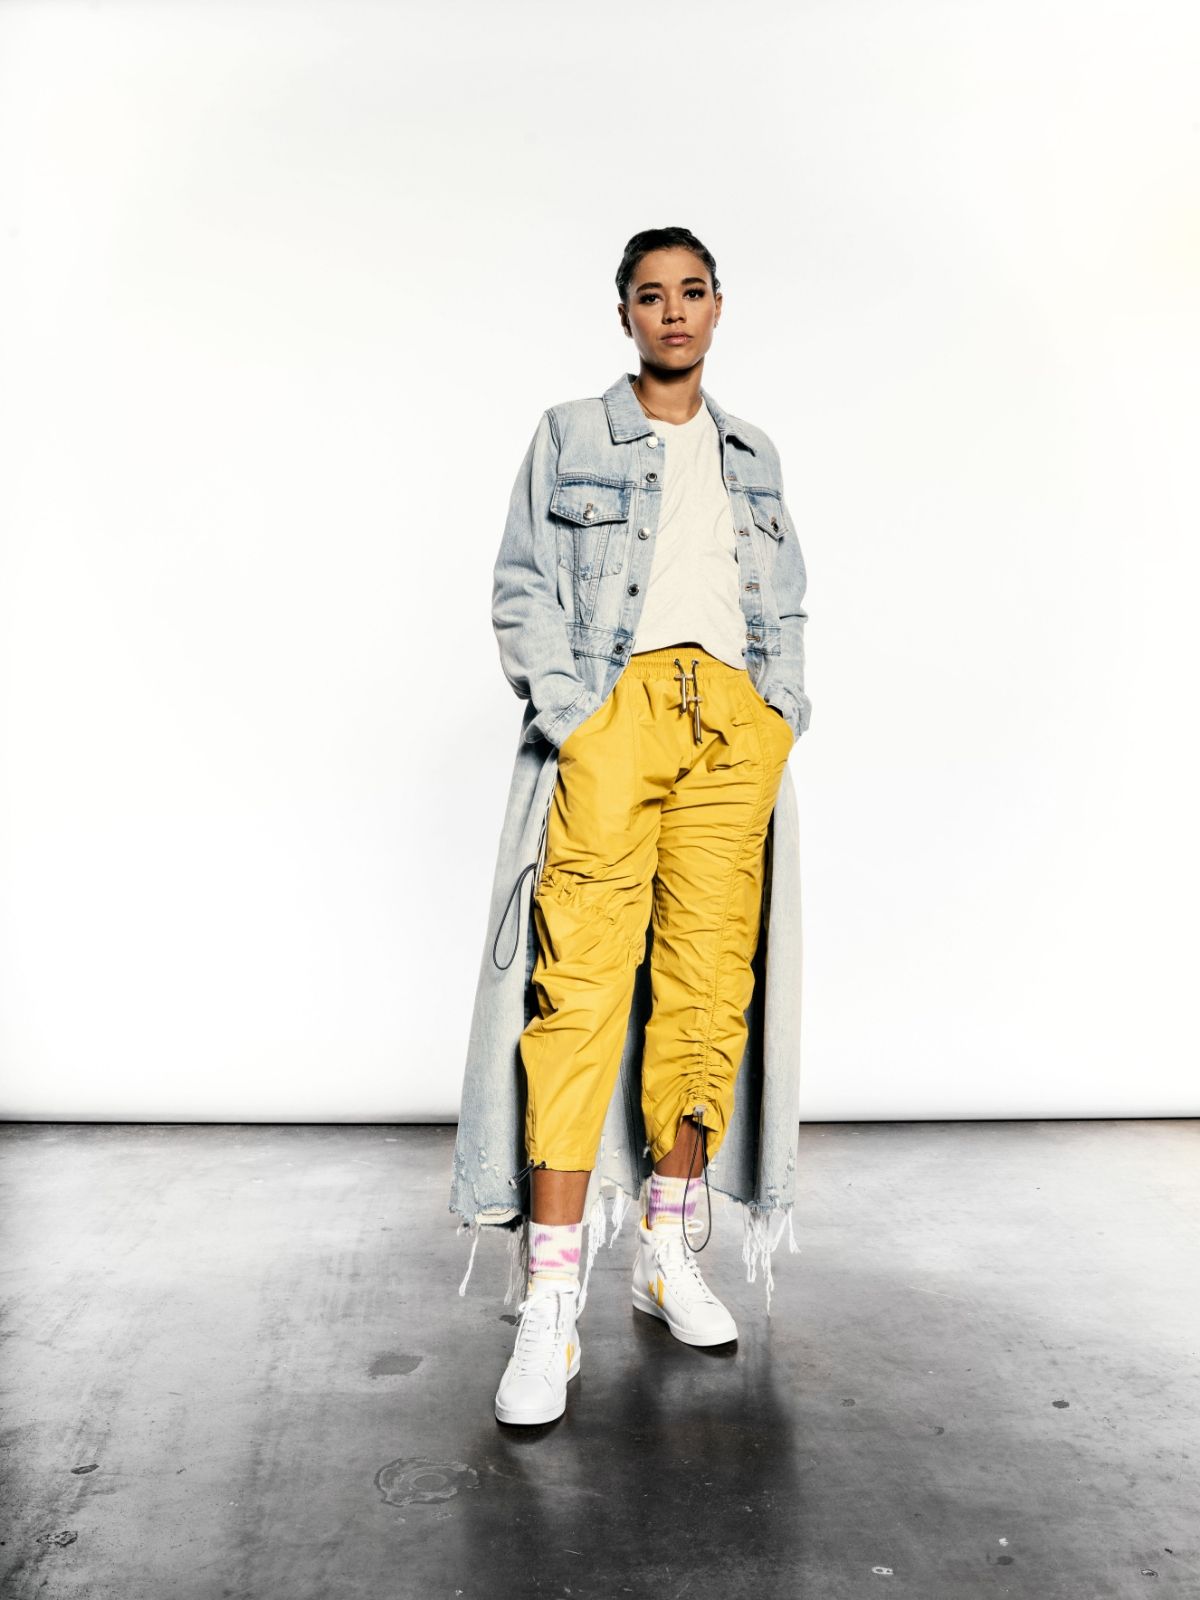 Natasha Clound in Denim overcoat, yellow pants and converse pro leather sneakers